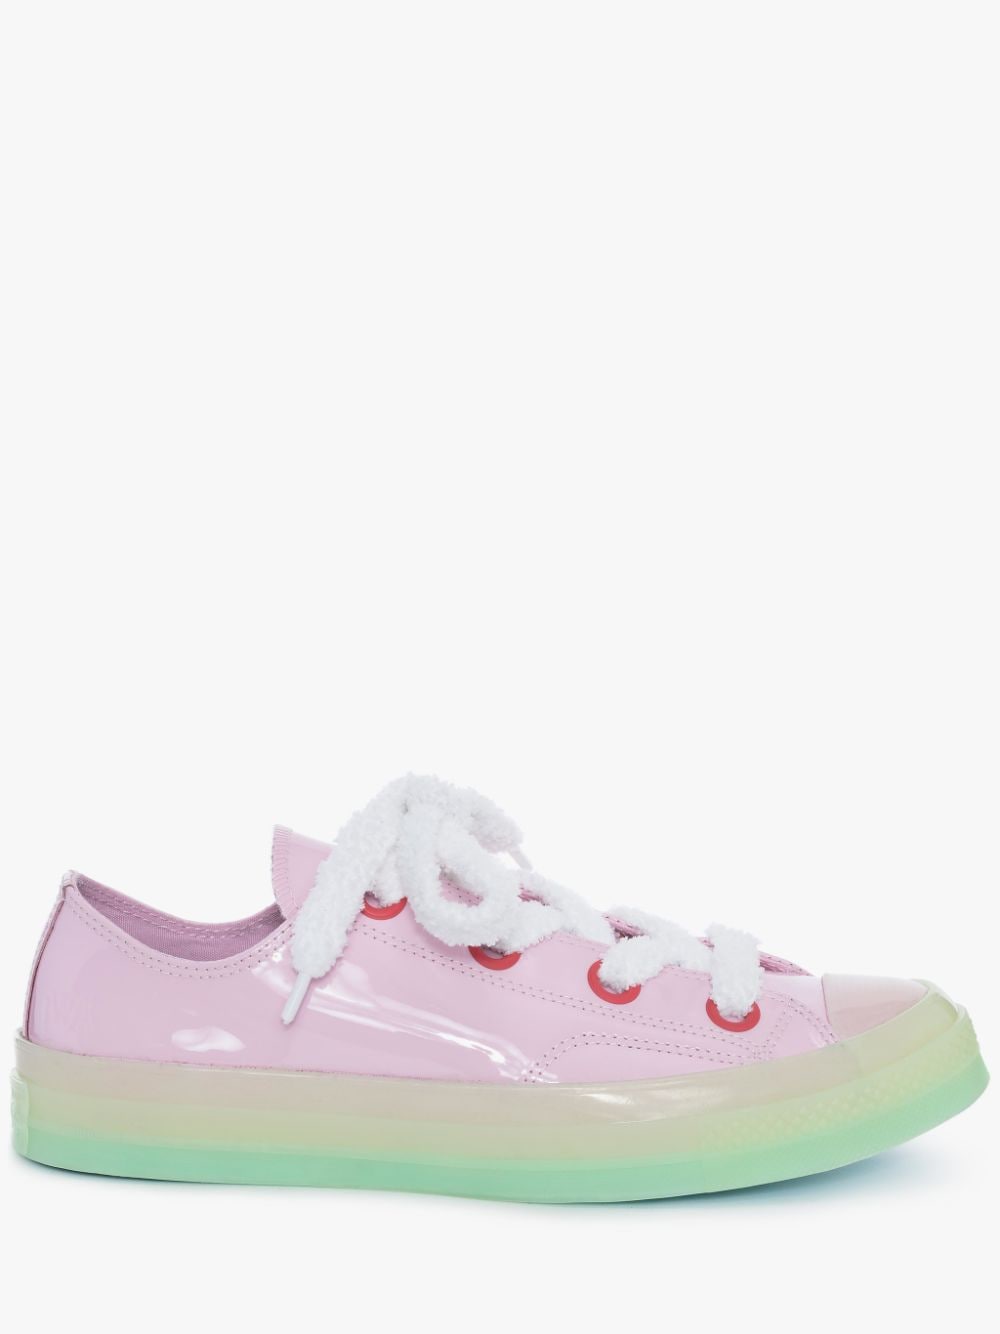 pink patent leather converse